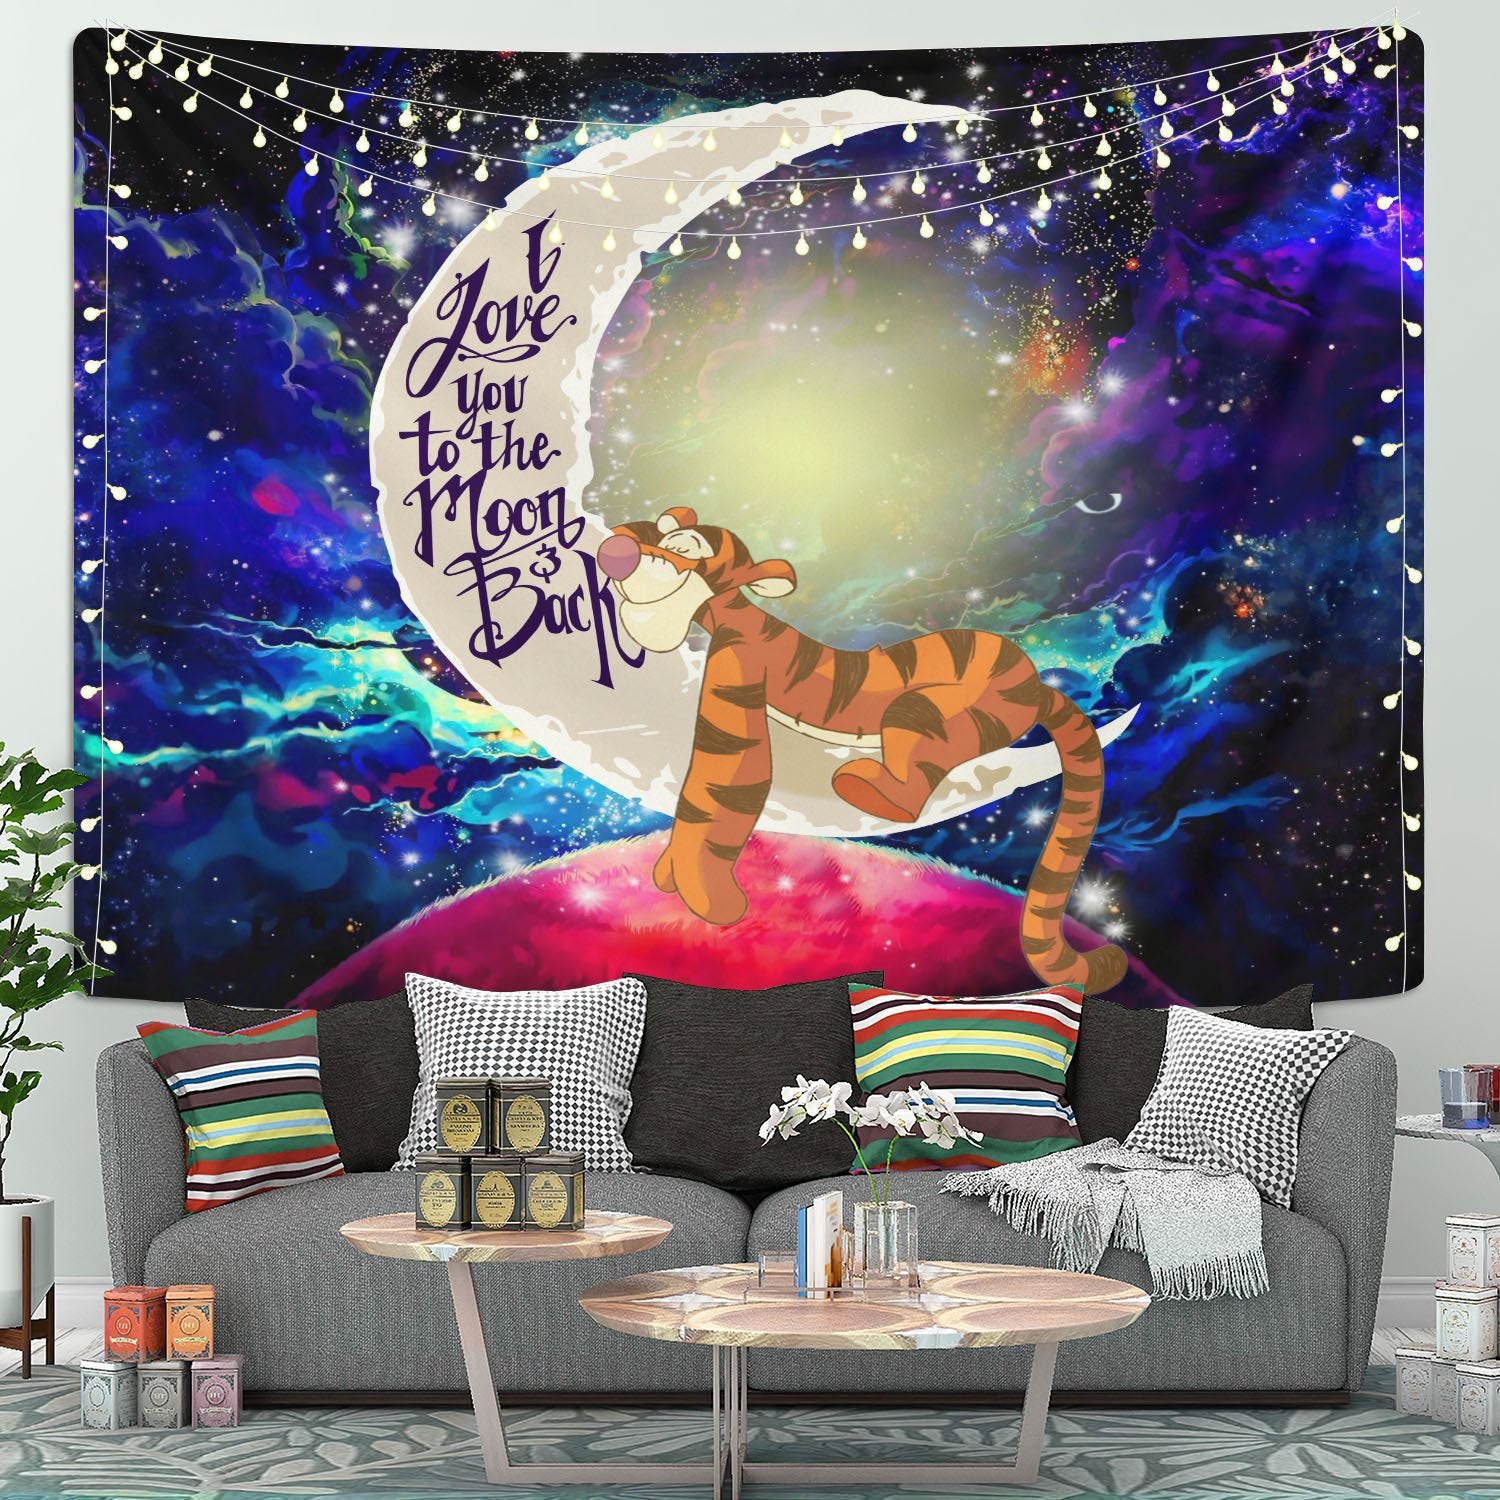 Tiger Moon And Back Tapestry Room Decor